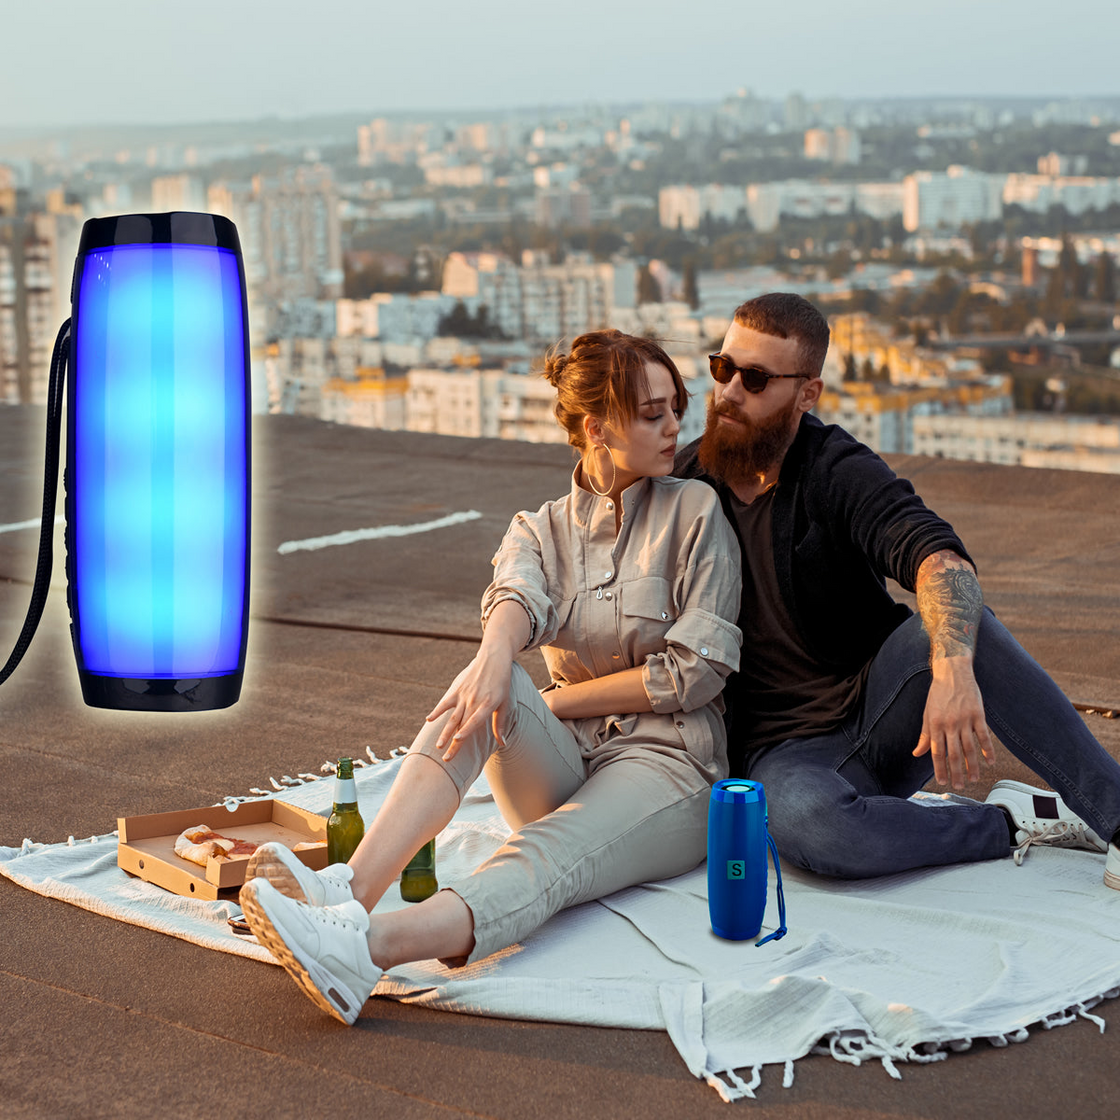 Rainbow LED Bluetooth Speakers In Vibrant Colors - Clear, Immersive Sound